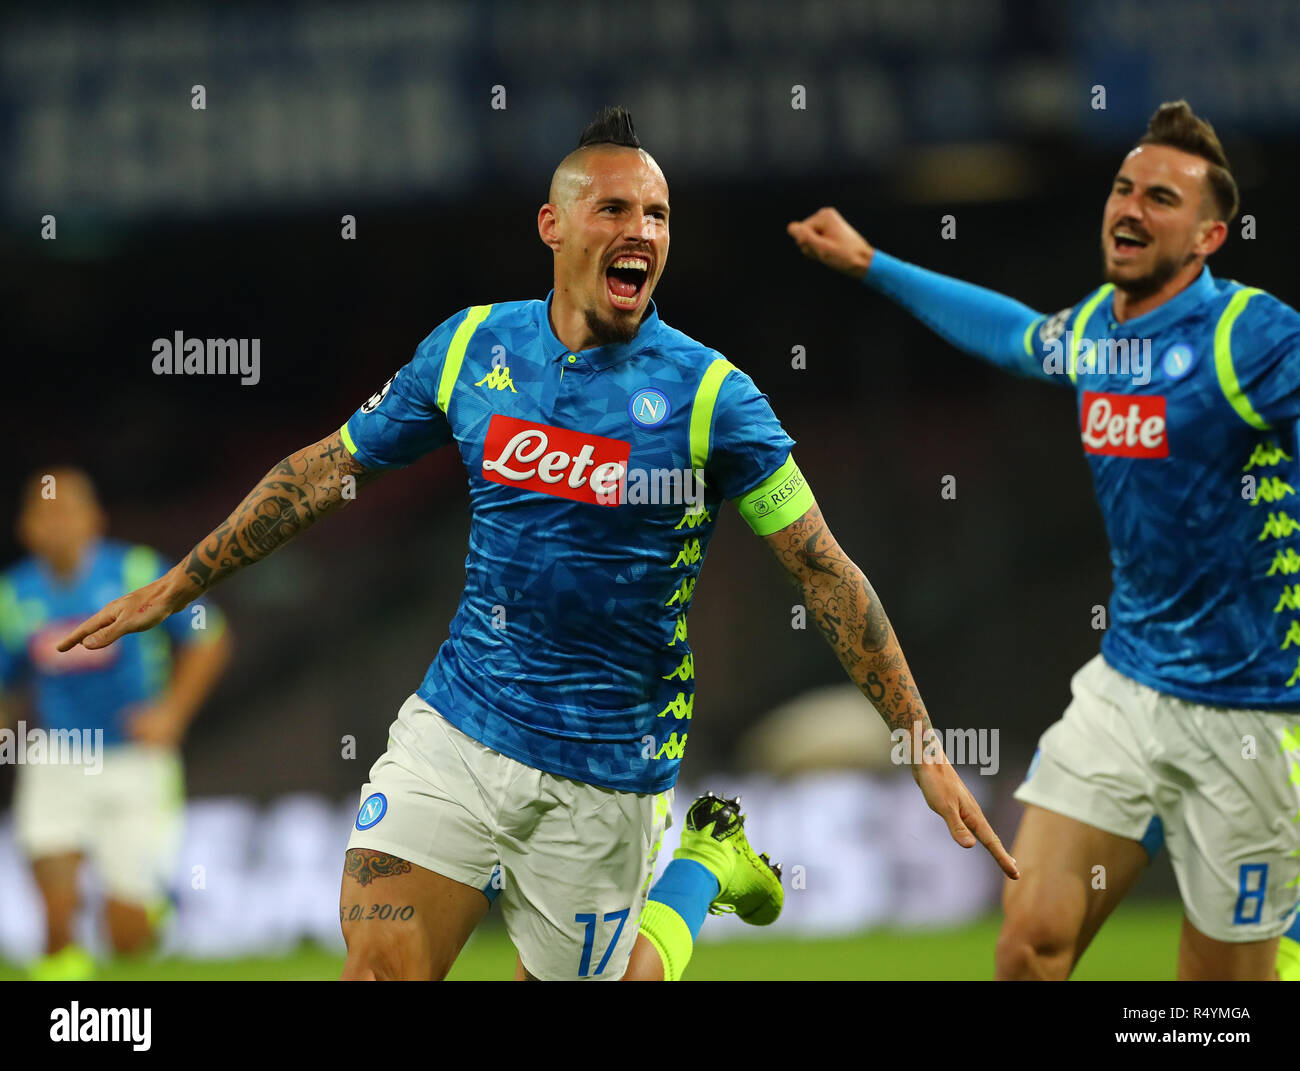 Naples, Italy. 28th Nov, 2018. Napoli's Marek Hamsik (L) celebrates his goal during the UEFA Champions League Group C match between Napoli and Red Star Belgrade in Naples, Italy, Nov. 28, 2018. Napoli won 3-1. Credit: Alberto Lingria/Xinhua/Alamy Live News Stock Photo